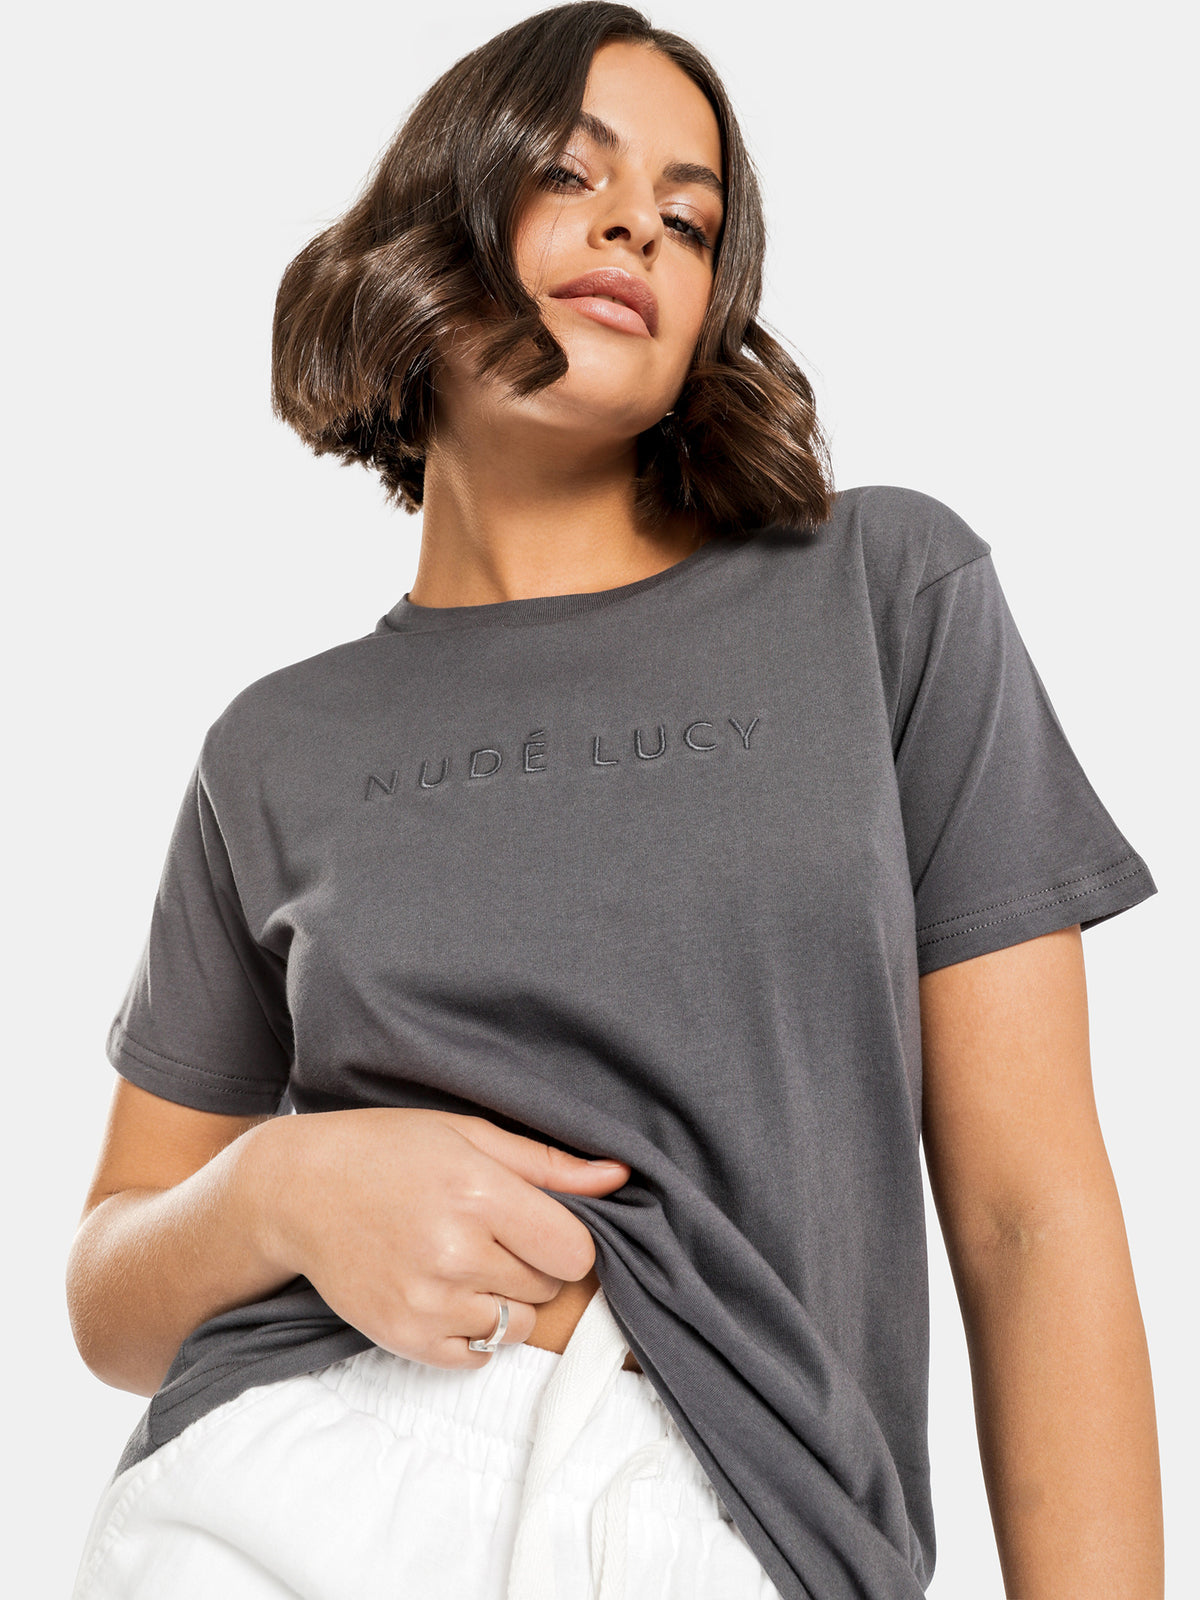 Nude Lucy Slogan T-Shirt in Navy